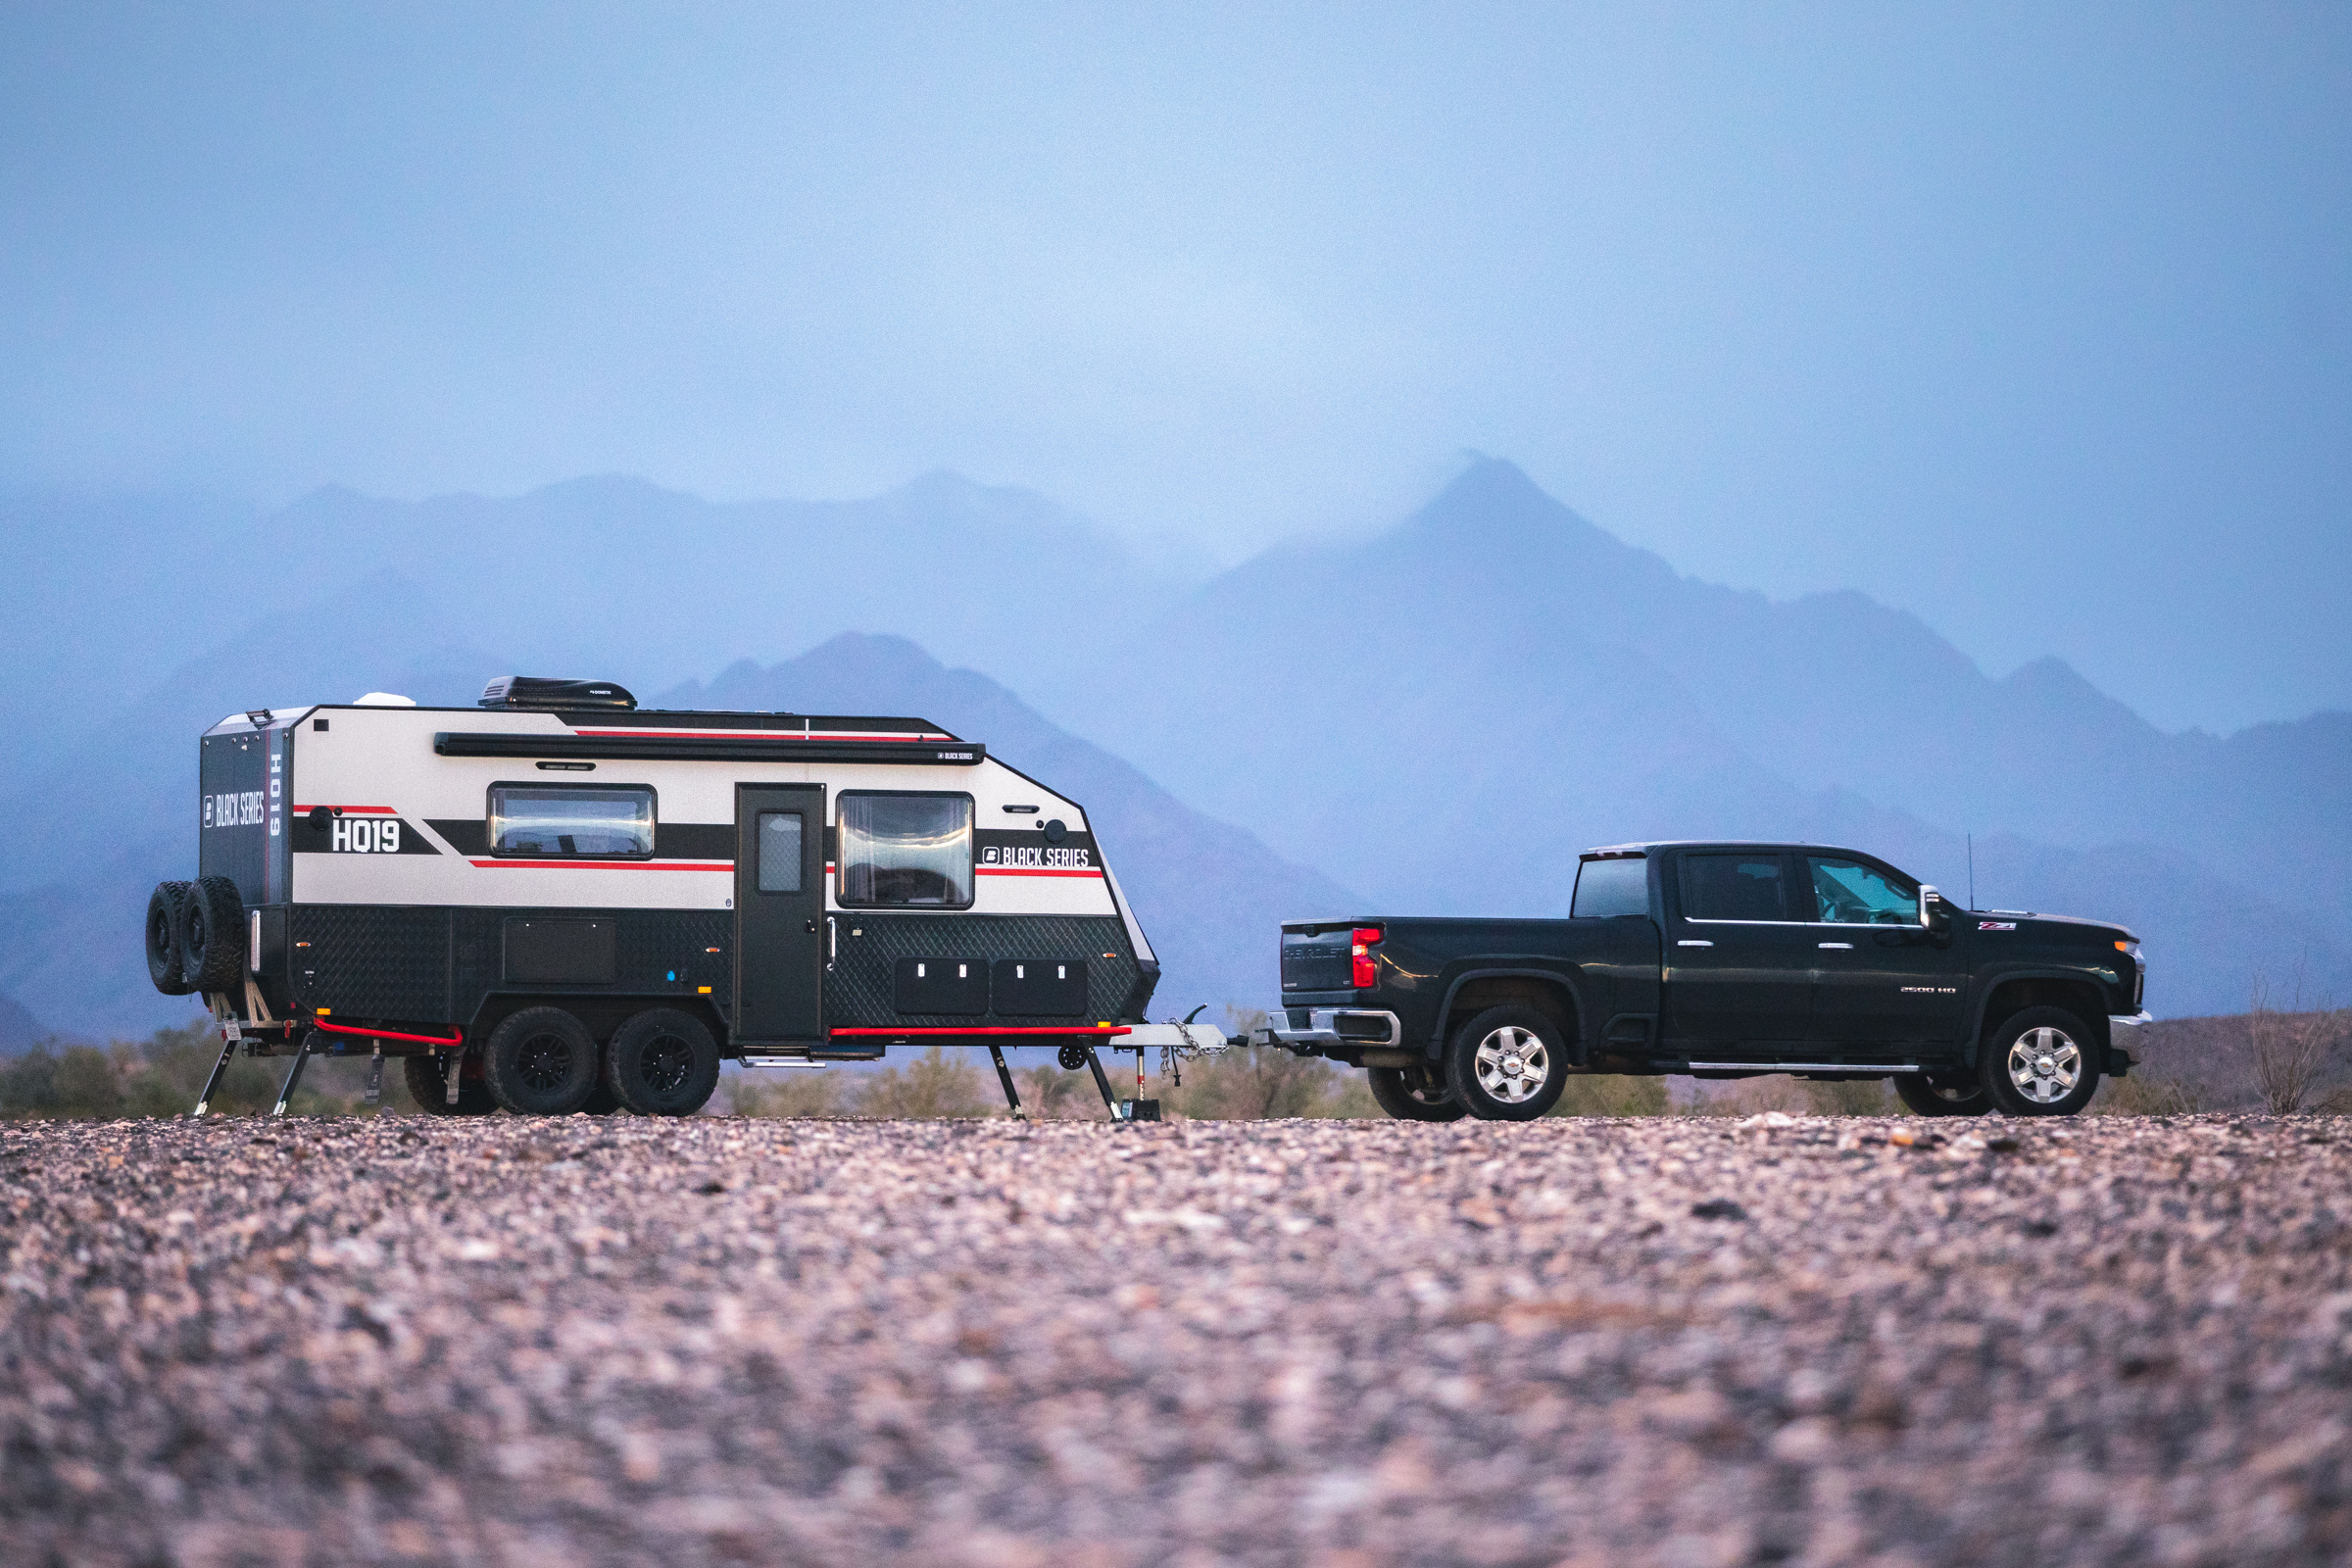 Truck with the blackseries camper